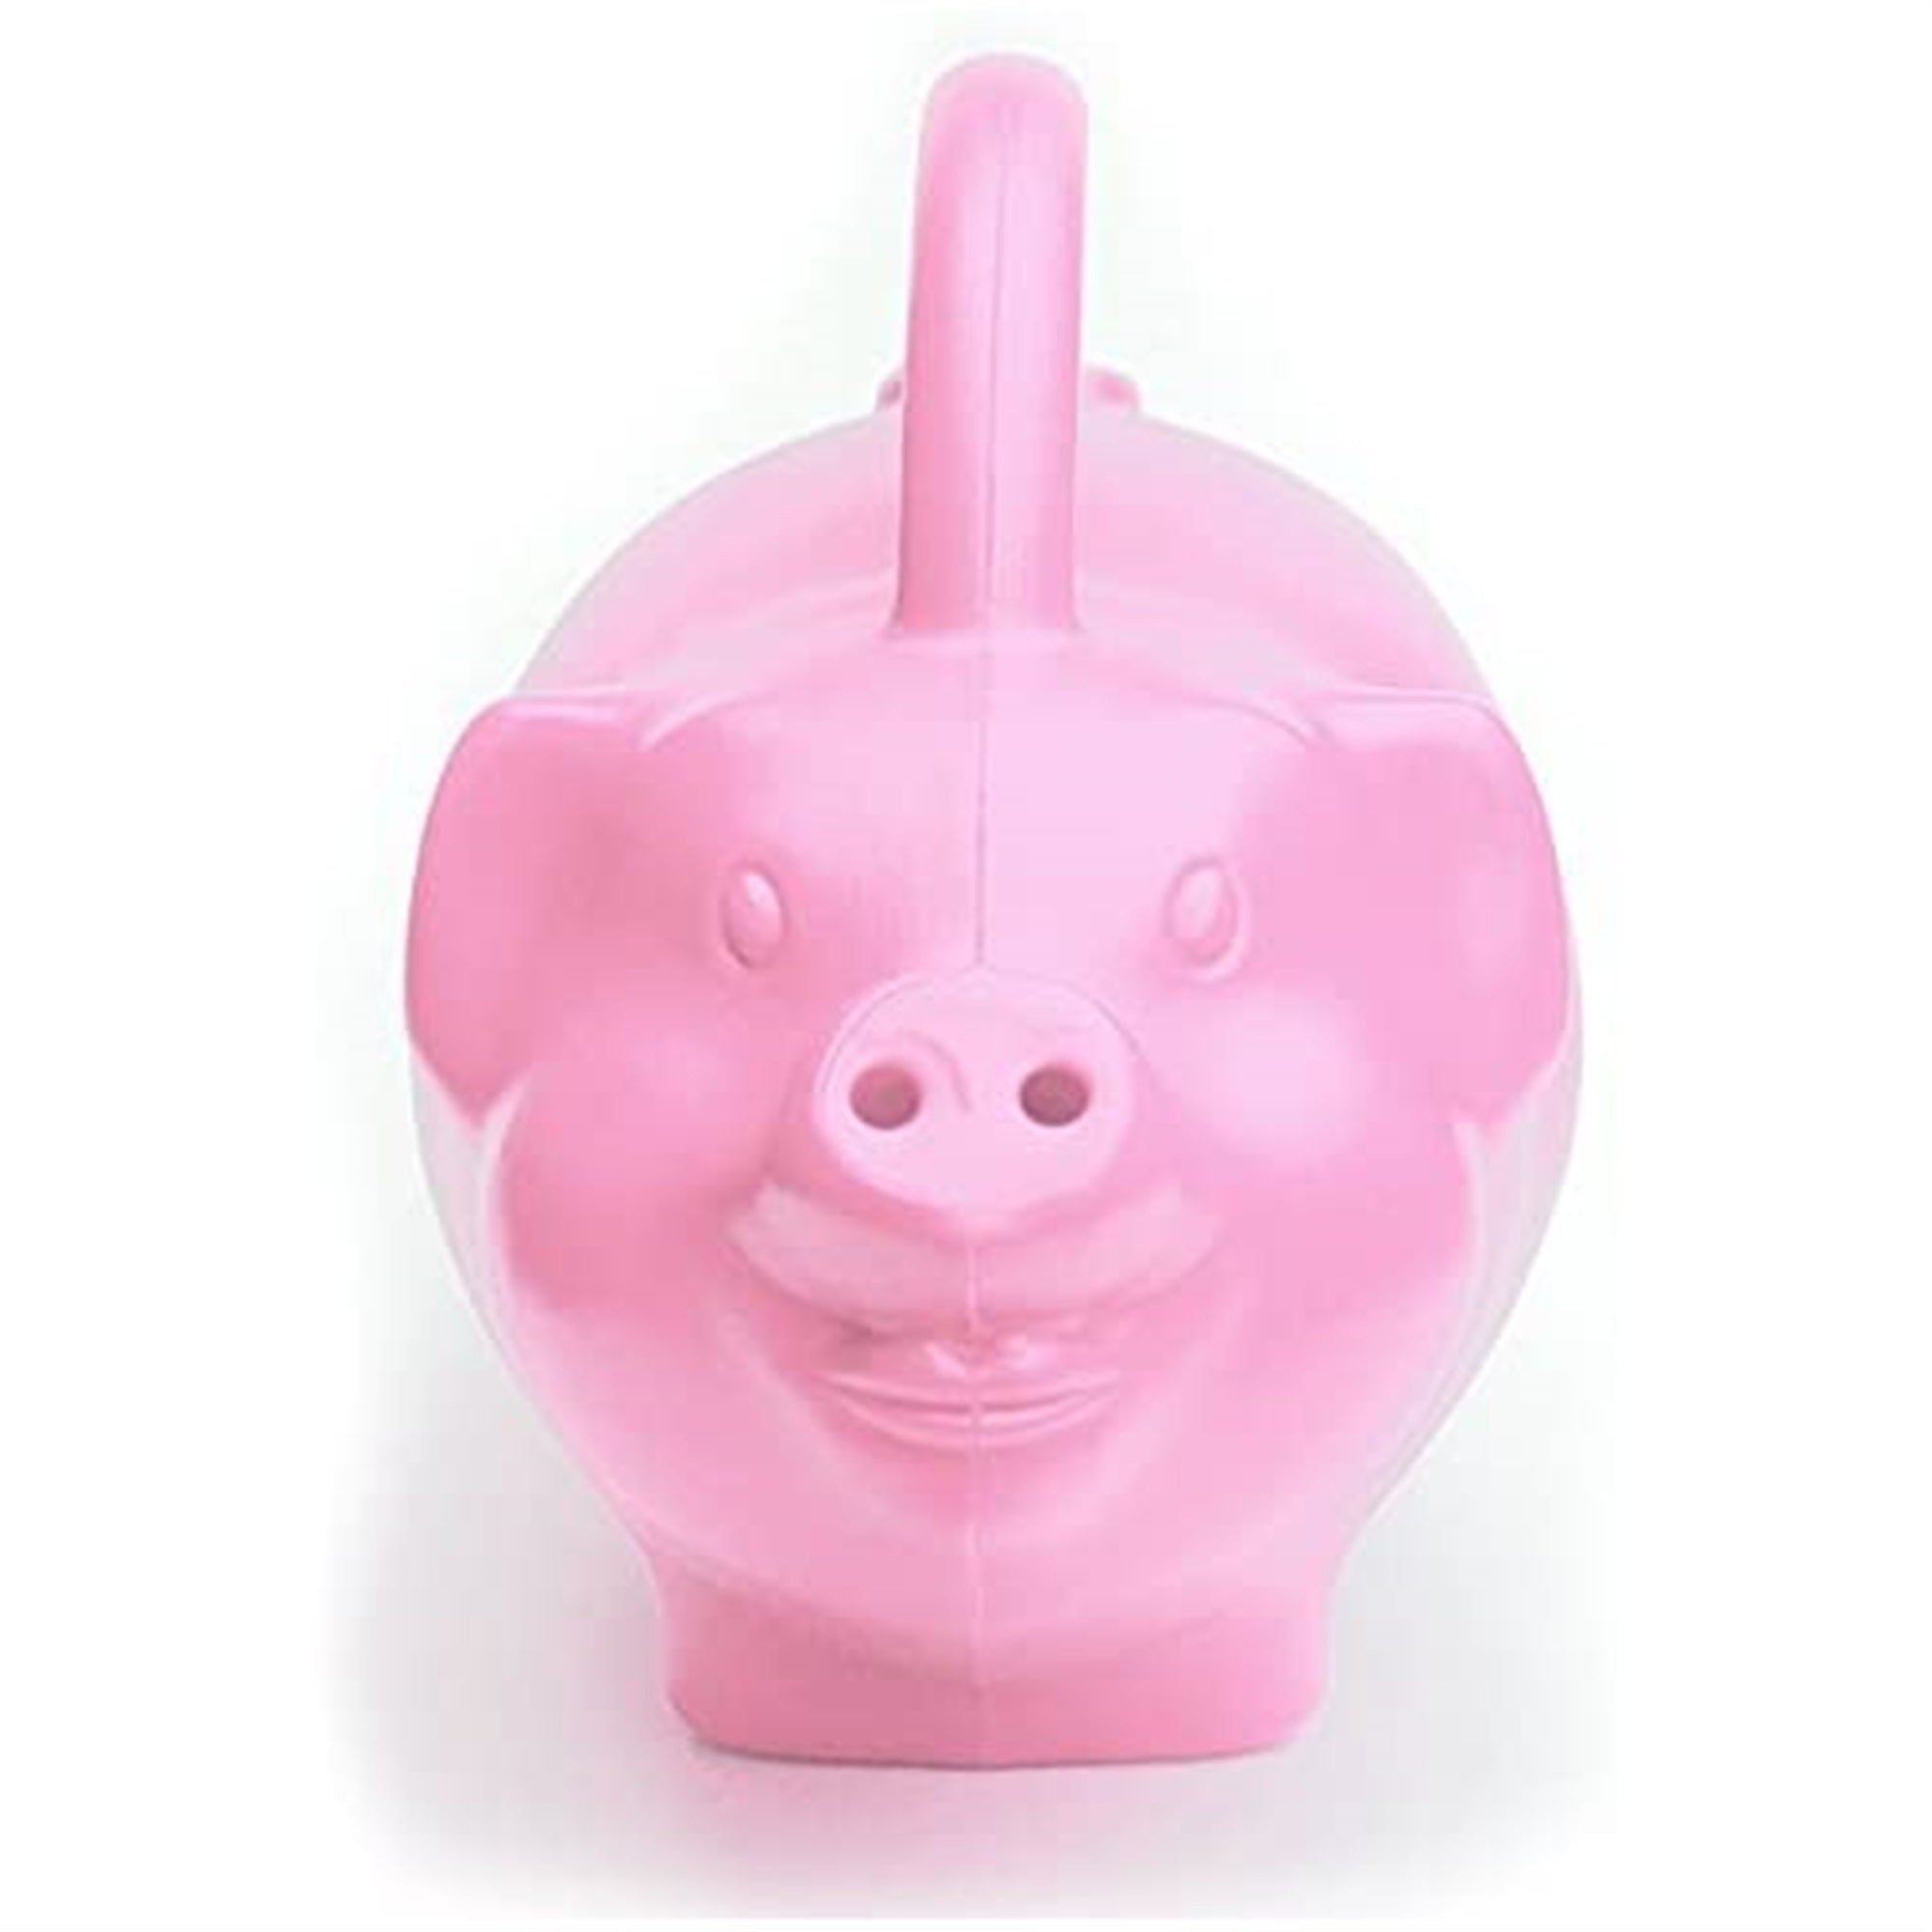 BABS Children's Pig Watering Can, Pink, 1.75 Gallons